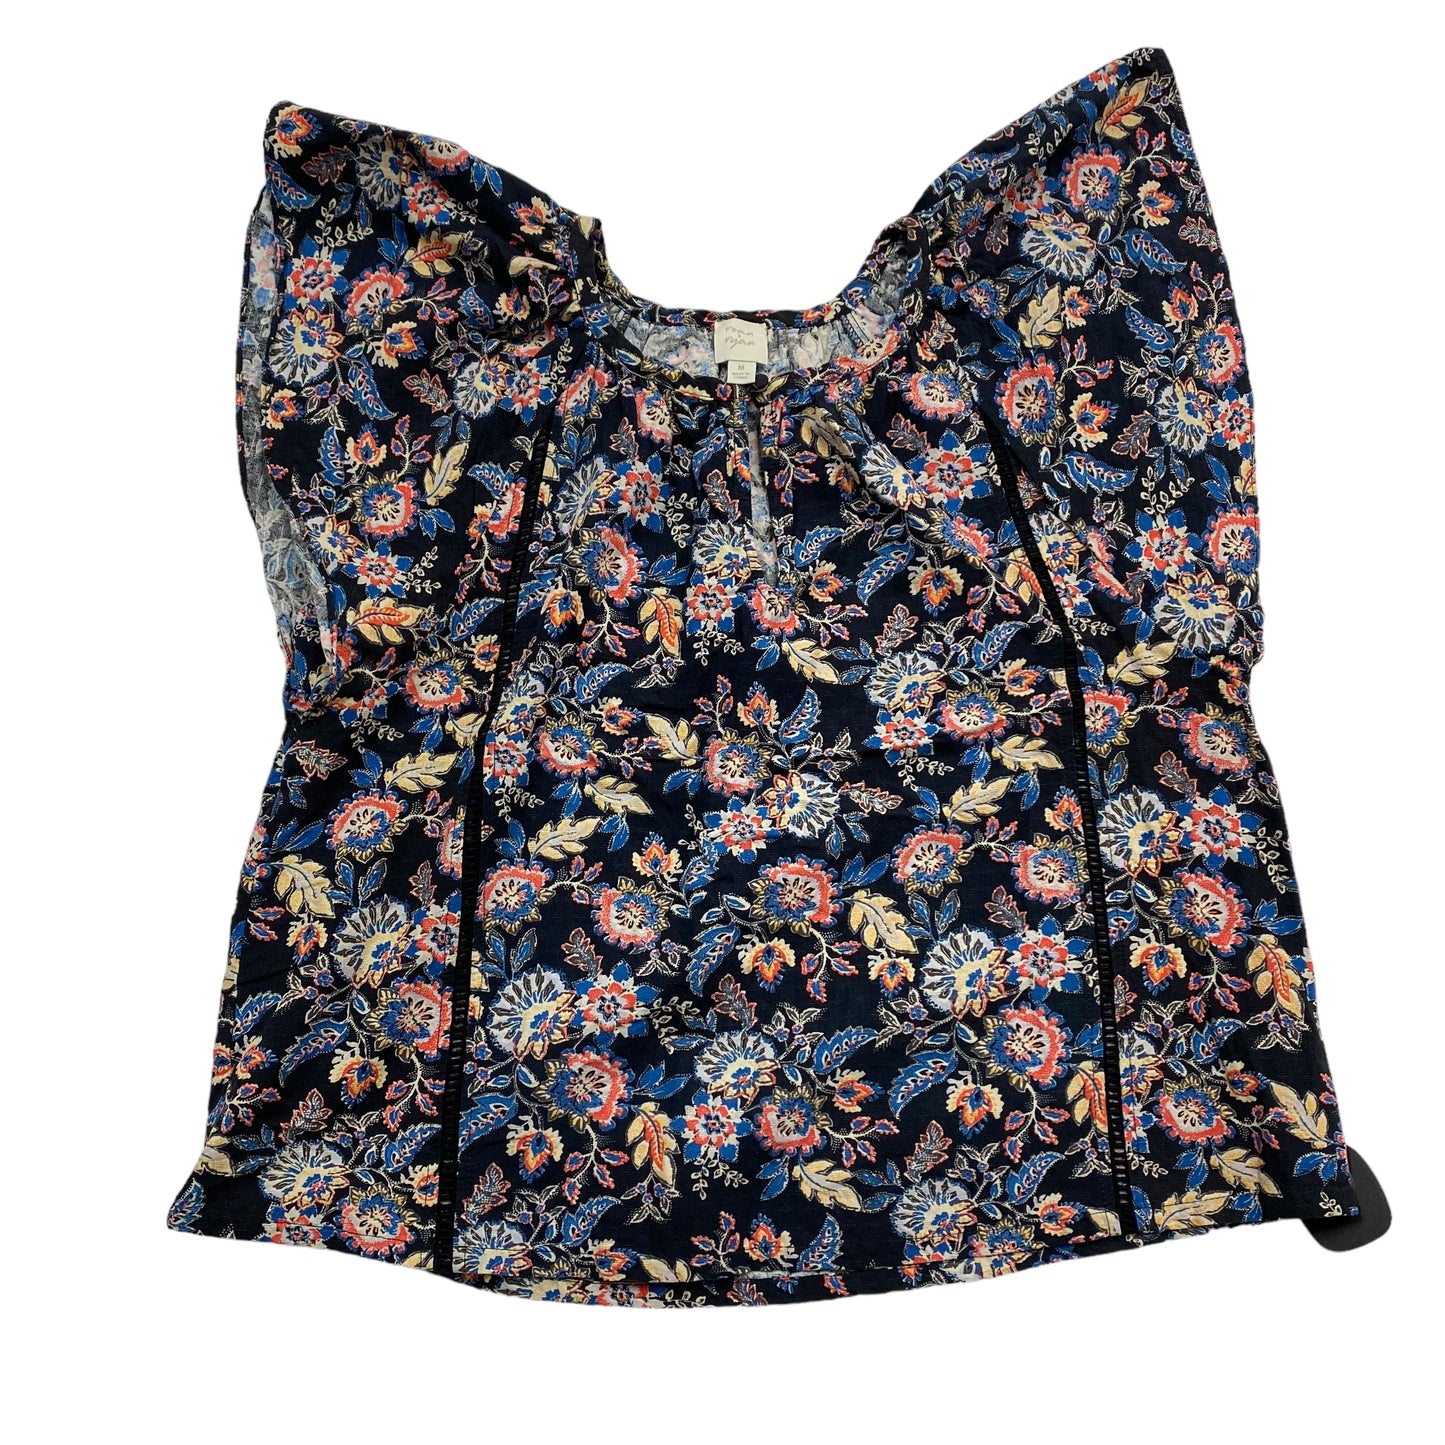 Floral Print Top Sleeveless Cmb, Size M